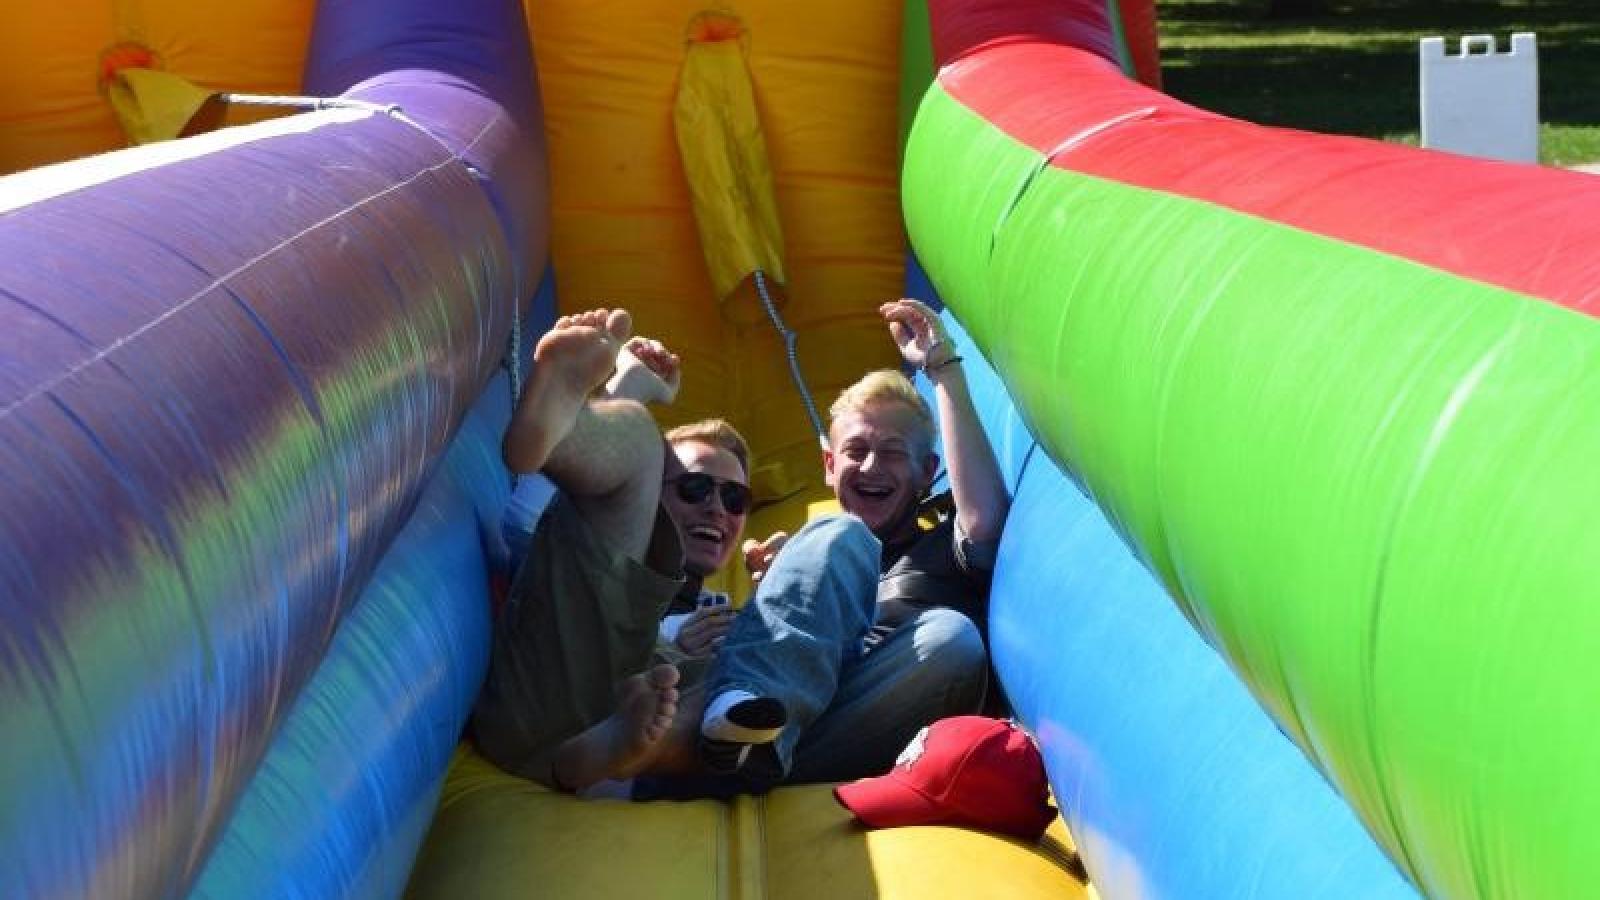 Two Students on inflatable at field day